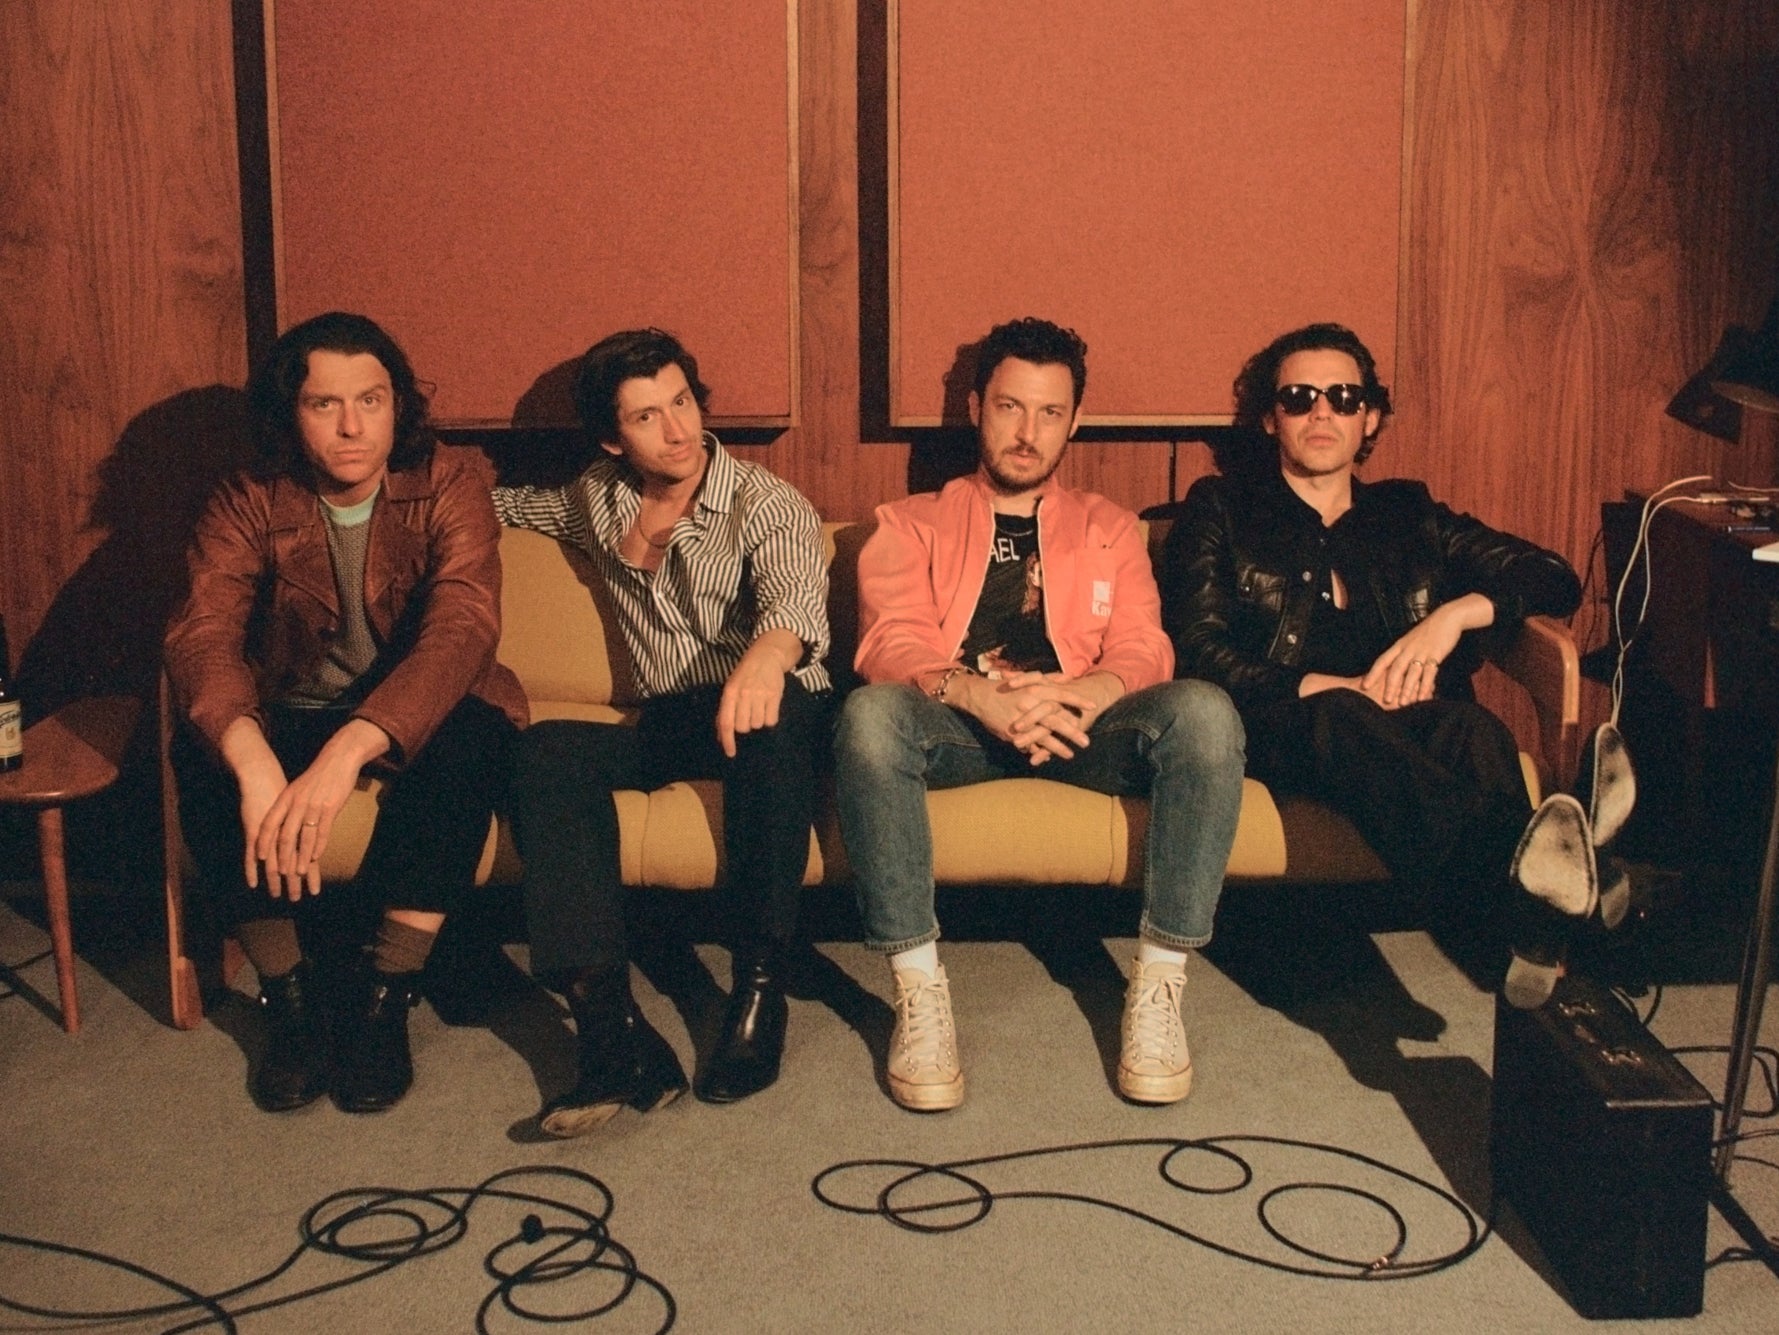 Arctic Monkeys in a promo shot for their new album ‘The Car'